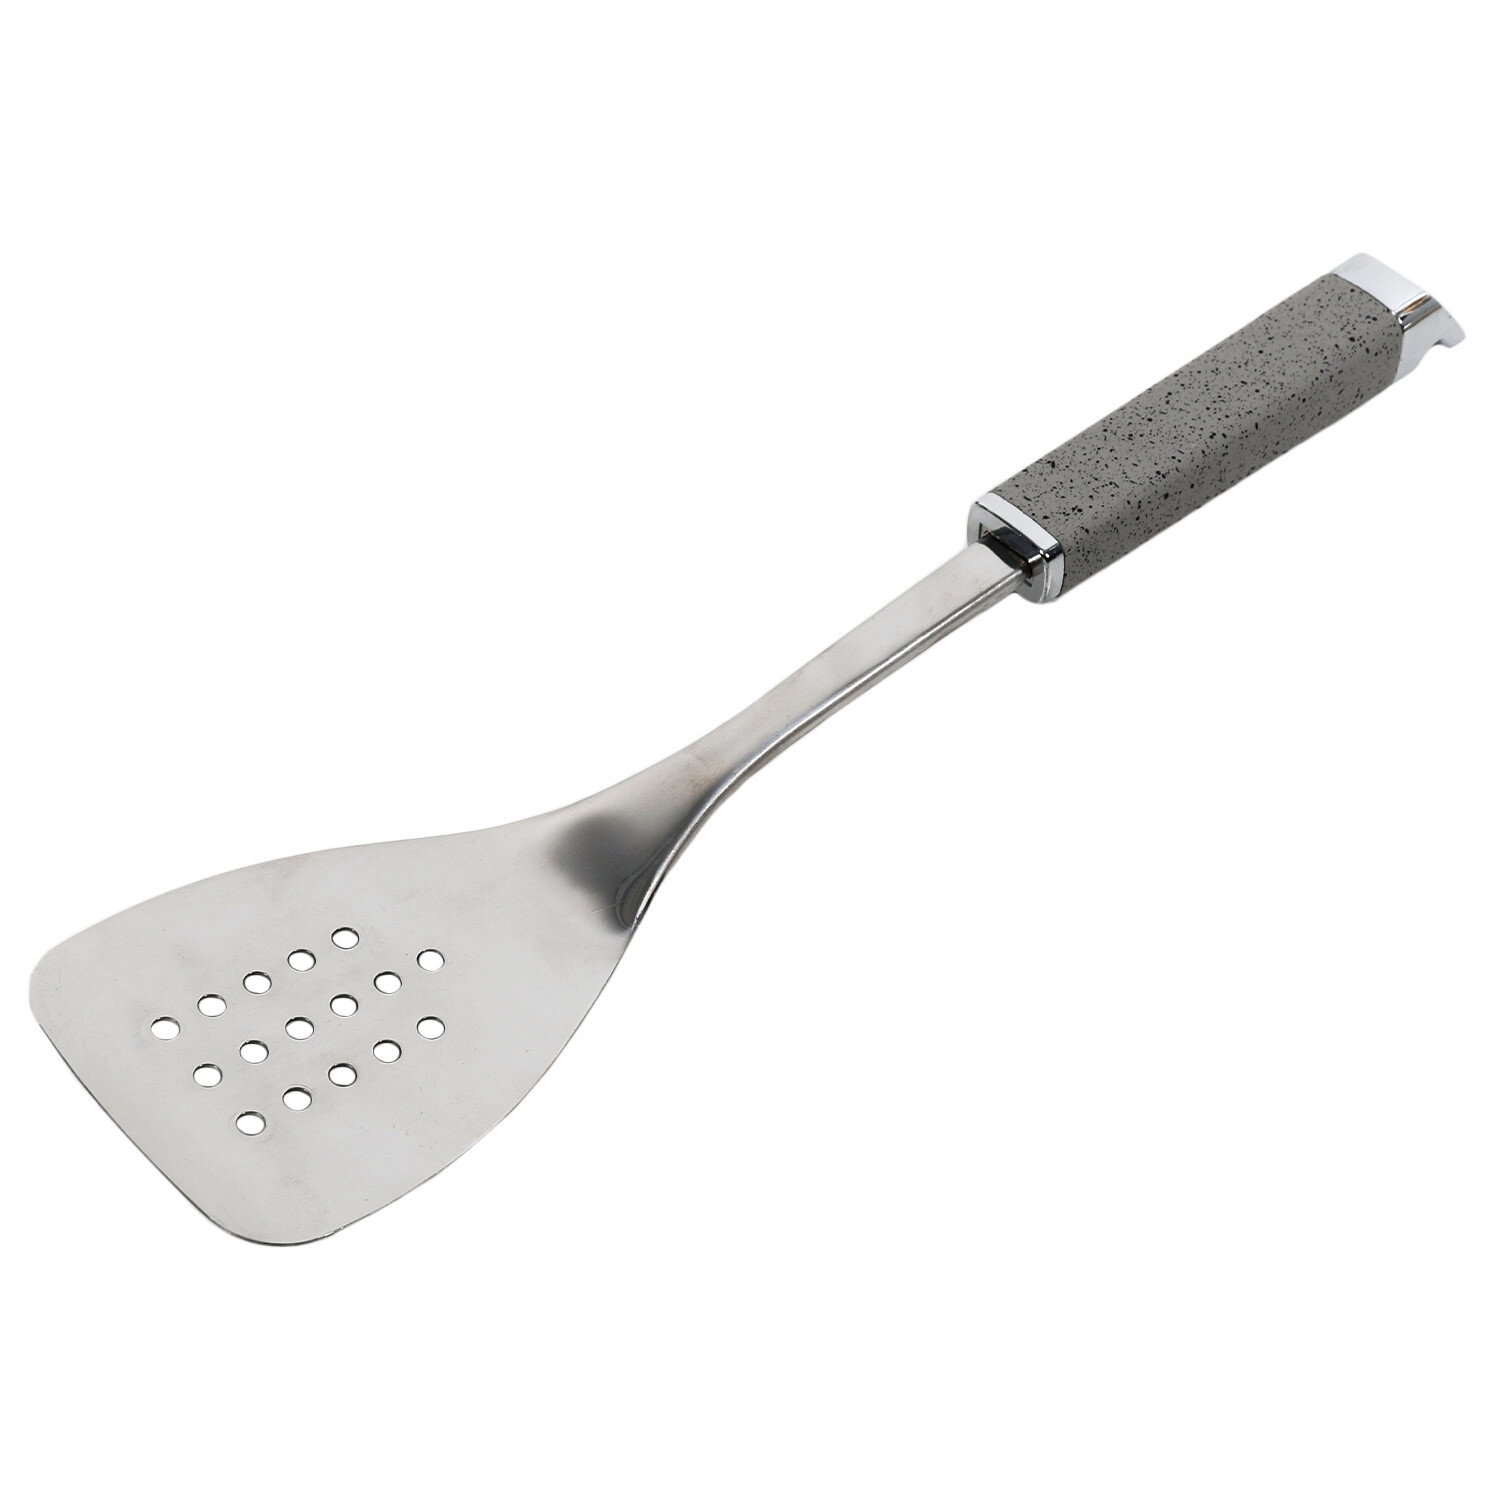 Stainless Steel Slotted Turner with Soft Touch Handle - Grey Image 1